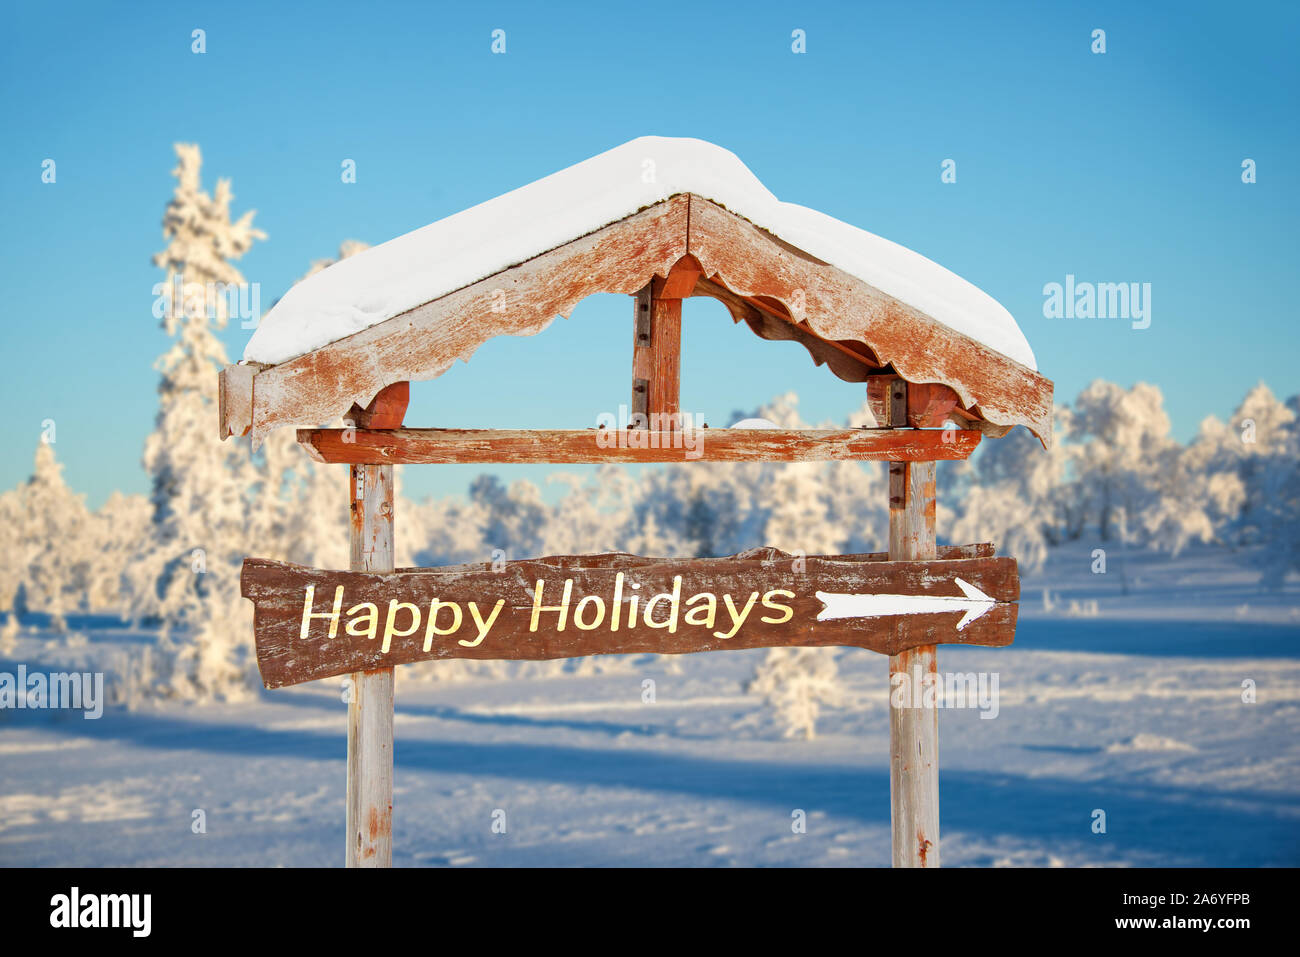 Happy holidays written on a wooden direction sign, blue sky and winter snowy tree landscape background seasons greetings christmas card Stock Photo